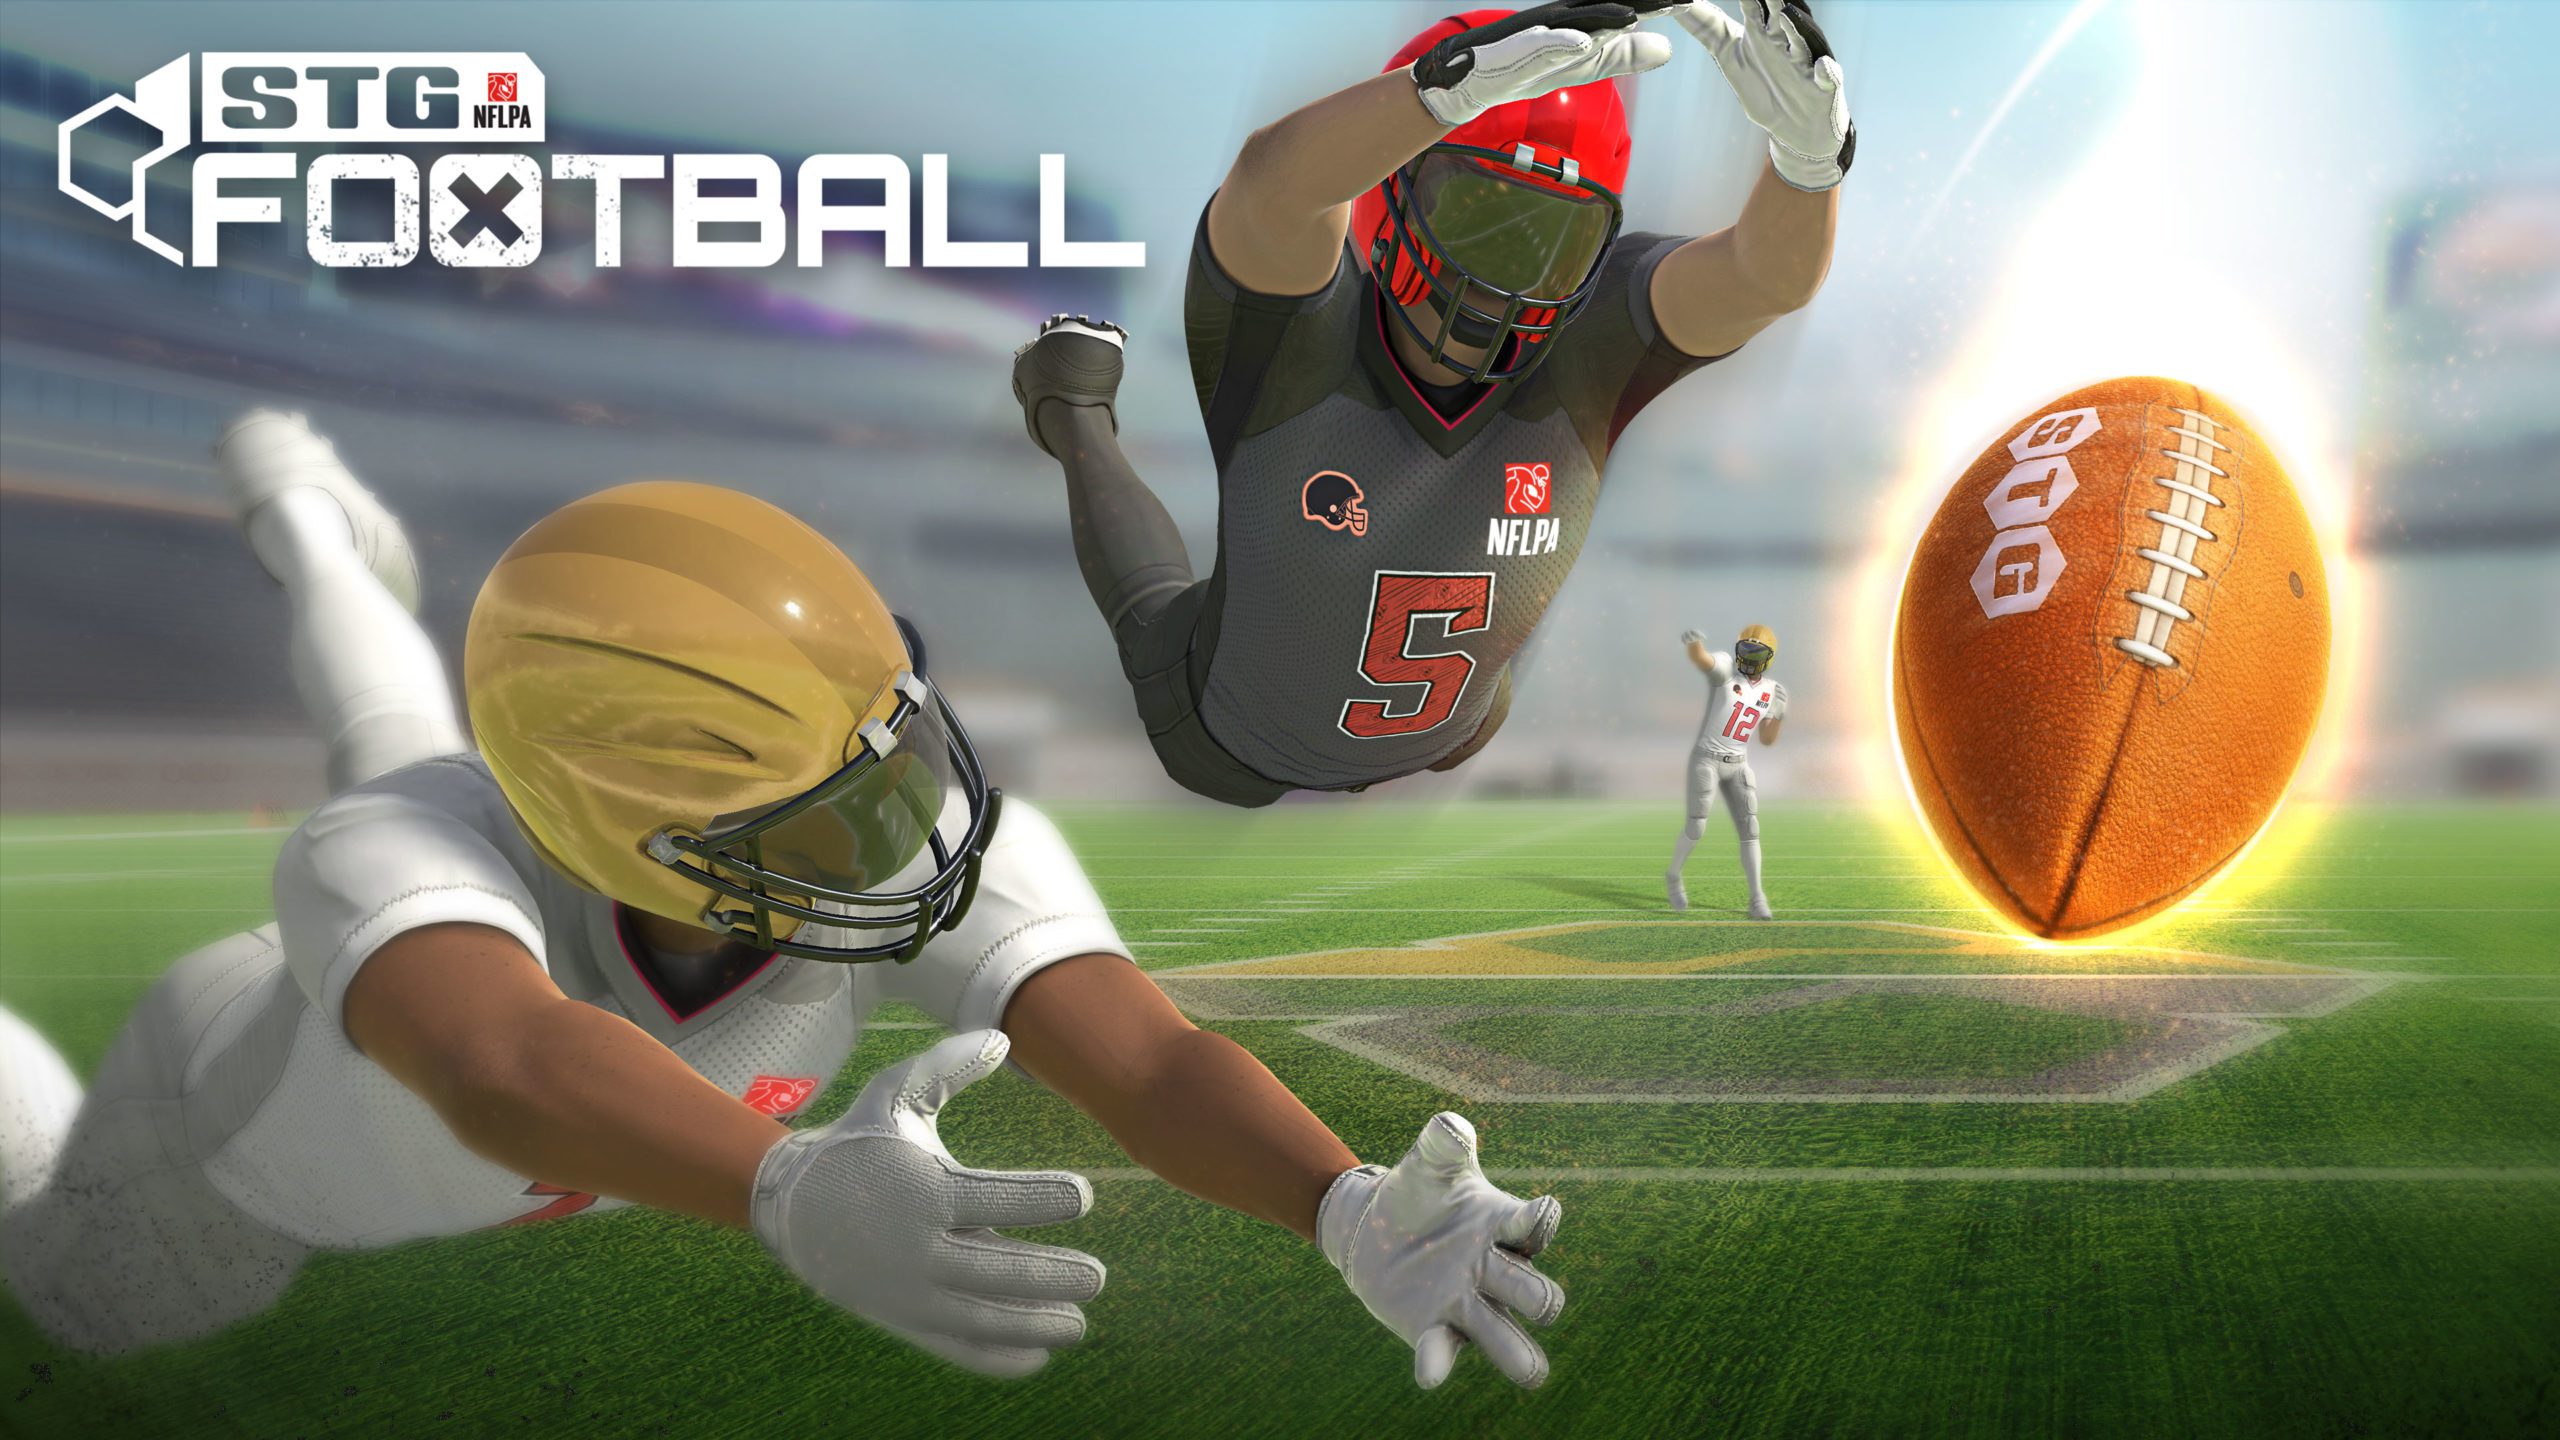 SuperTeam Games, the NFLPA and OneTeam Partners Announce STG Football, A Refreshing Take on Sports Games Powered by Blockchain Technology